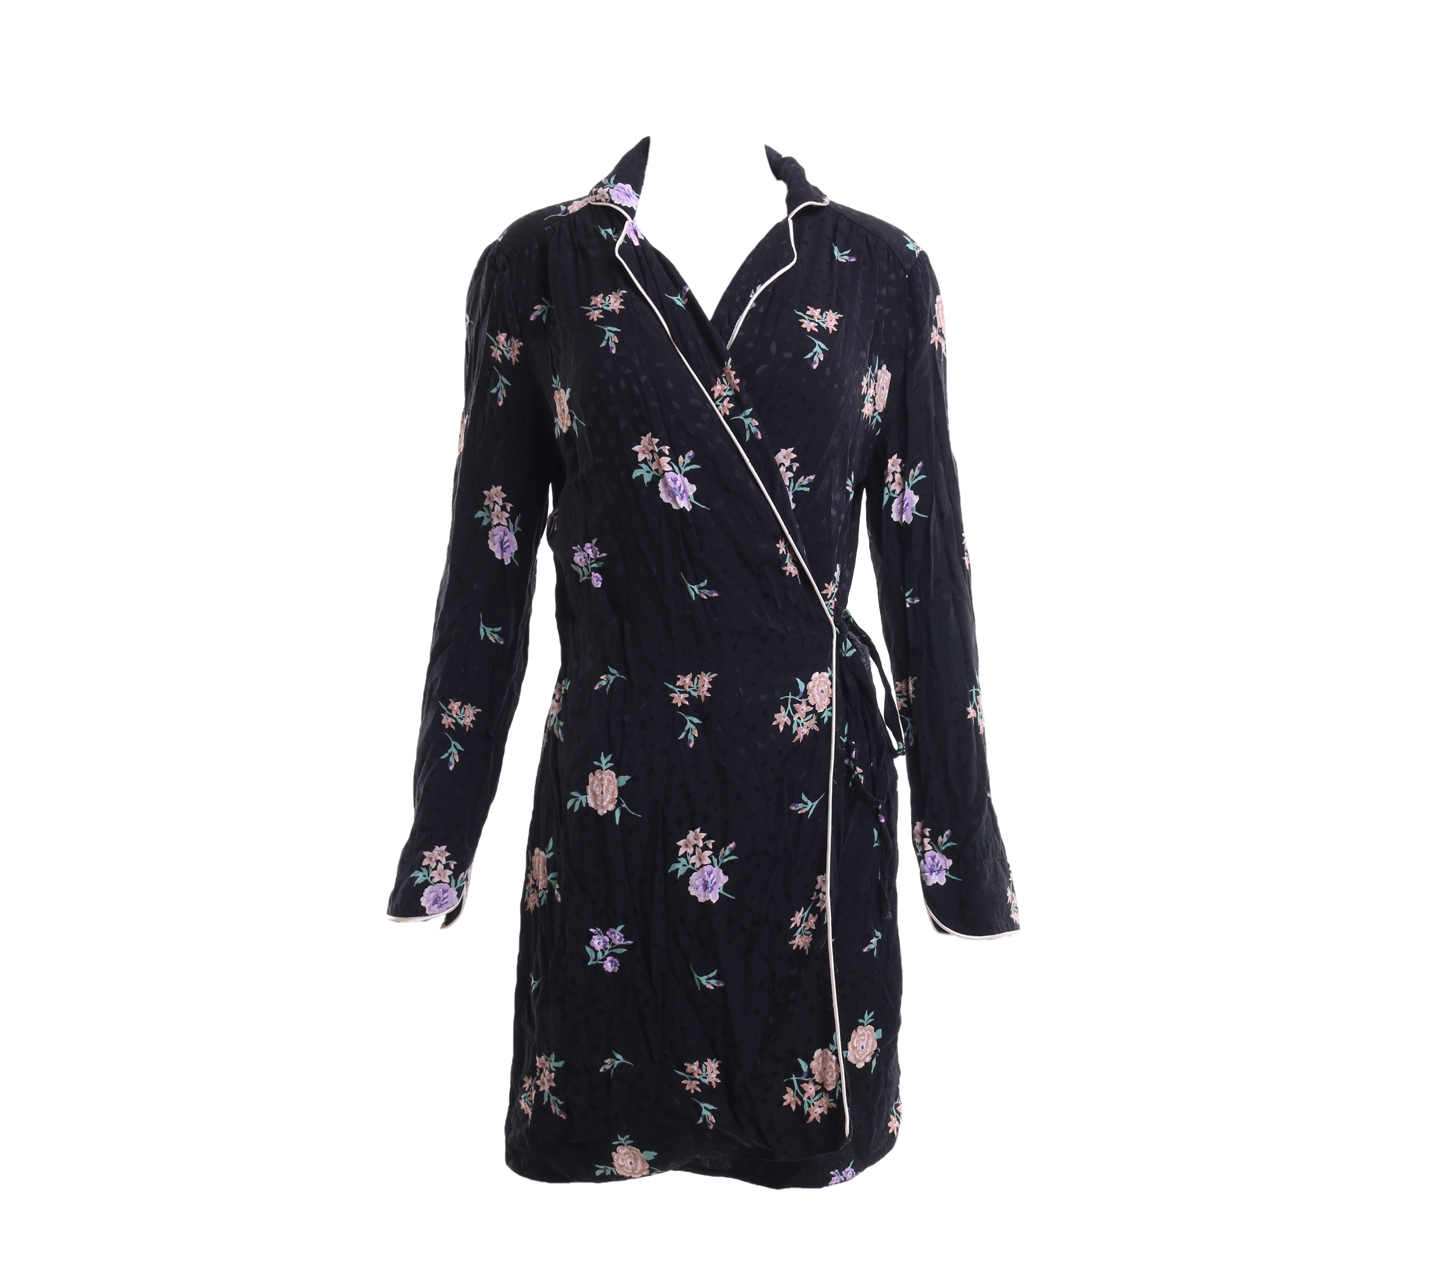 Pins and Needles Black Floral Outerwear